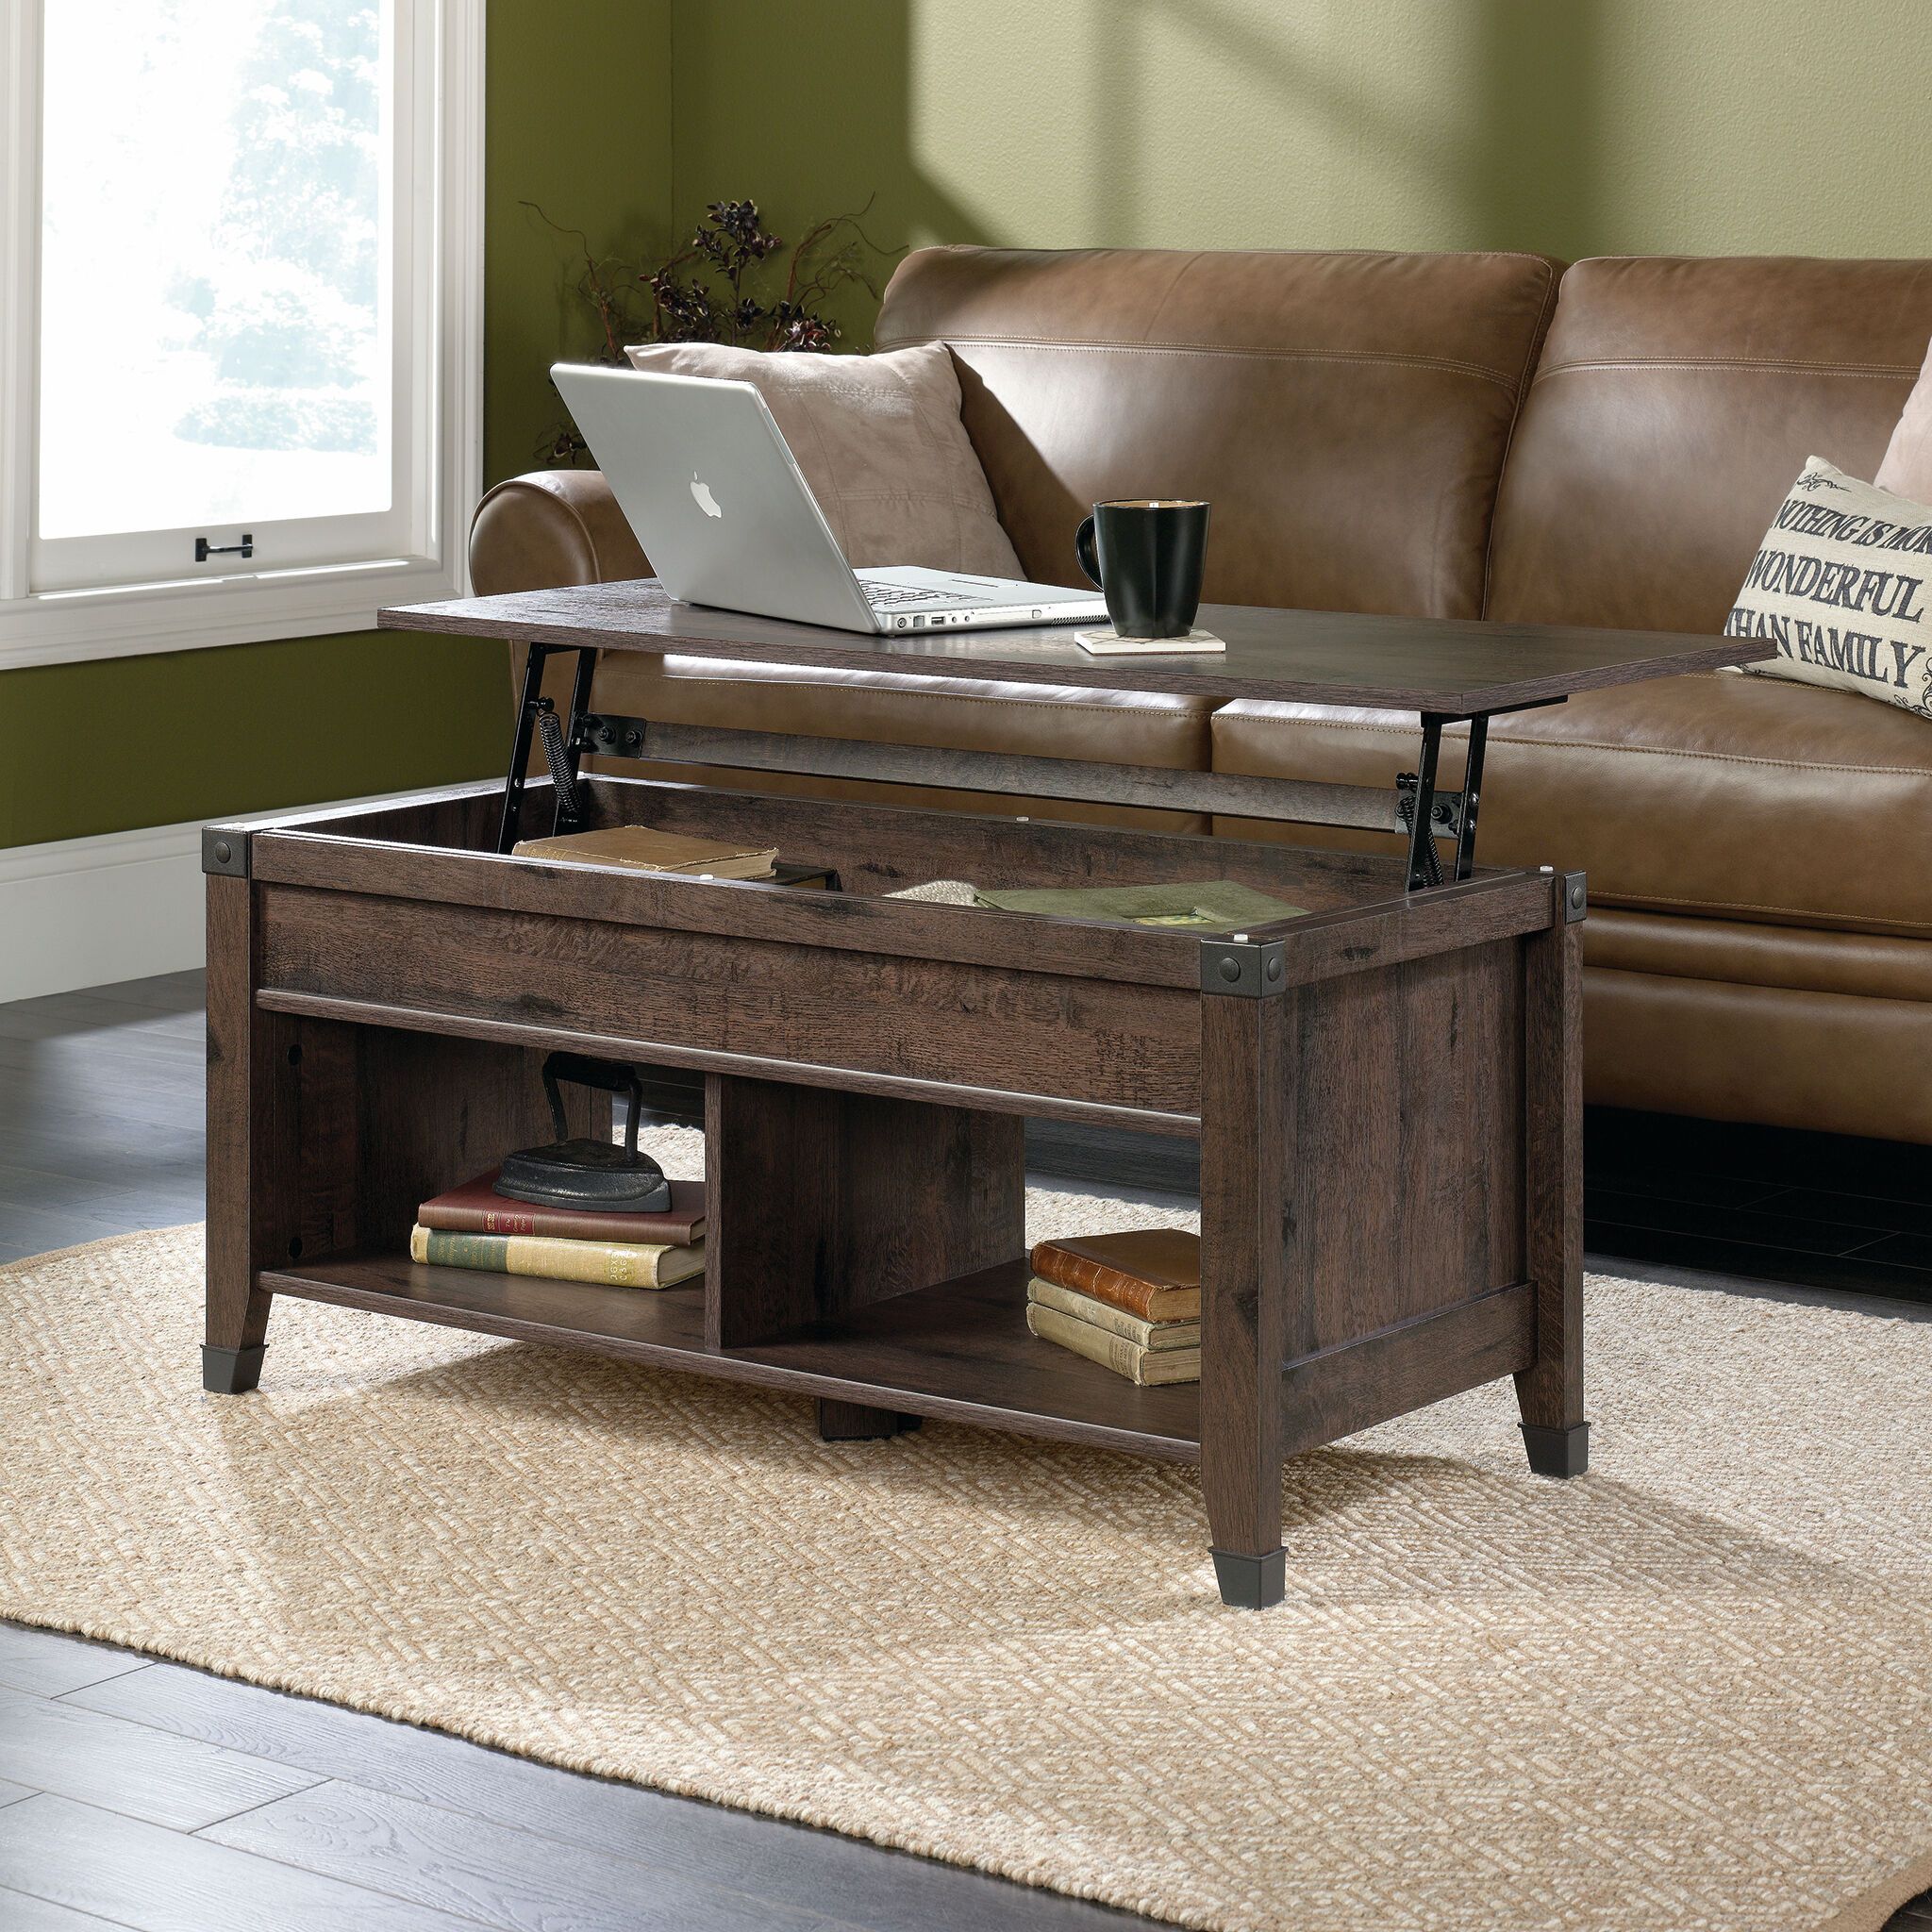 Rectangular Lift Top Contemporary Coffee Table In Coffee Oak | Mathis Throughout Wood Lift Top Coffee Tables (Gallery 3 of 20)